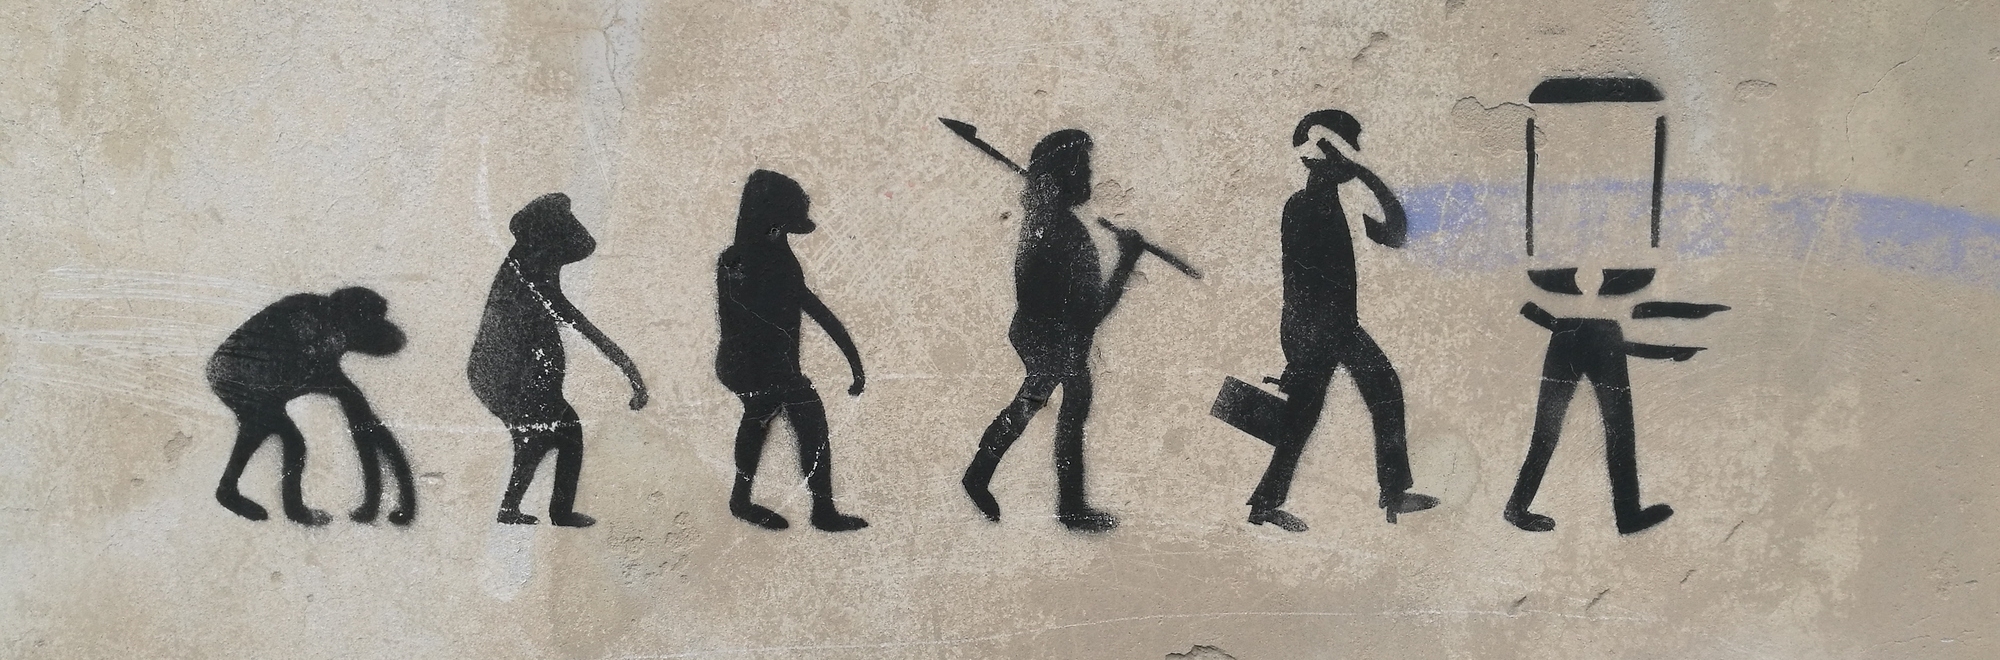 The evolution of the agency model: What's next?